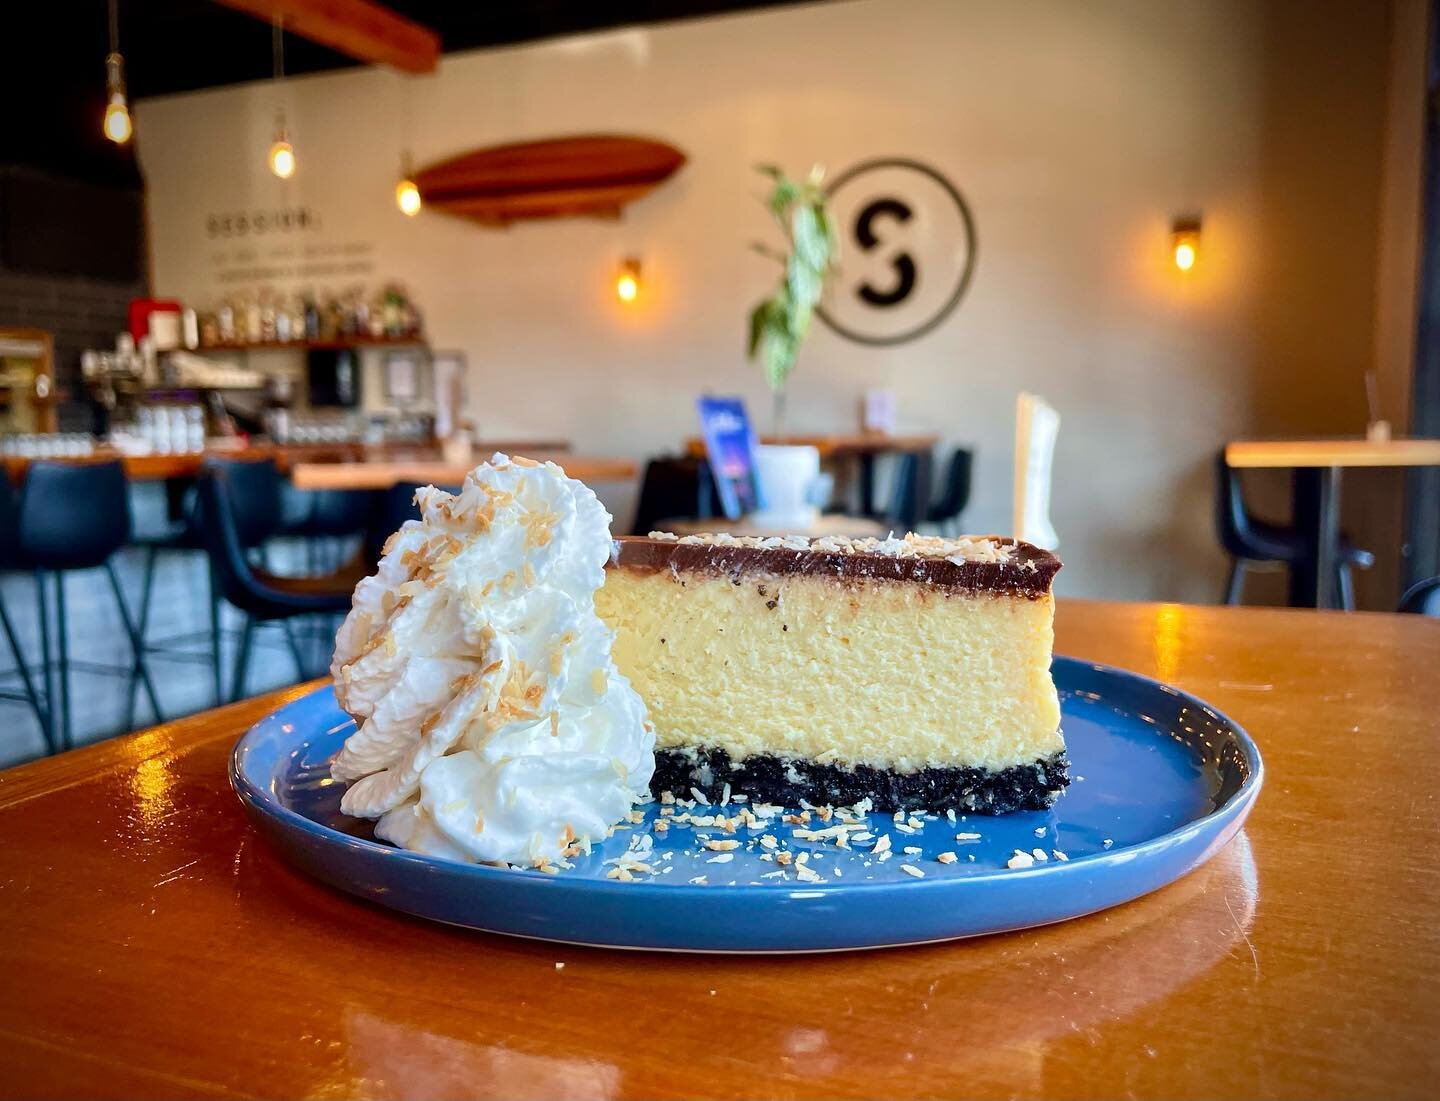 Get ready to sweeten up Mother's Day weekend with the return of our Nanaimo Bar cheesecake! This delightful dessert features a fluffy, custard cheesecake atop a chewy chocolate coconut crust, topped with a rich chocolate ganache, vanilla whipped crea